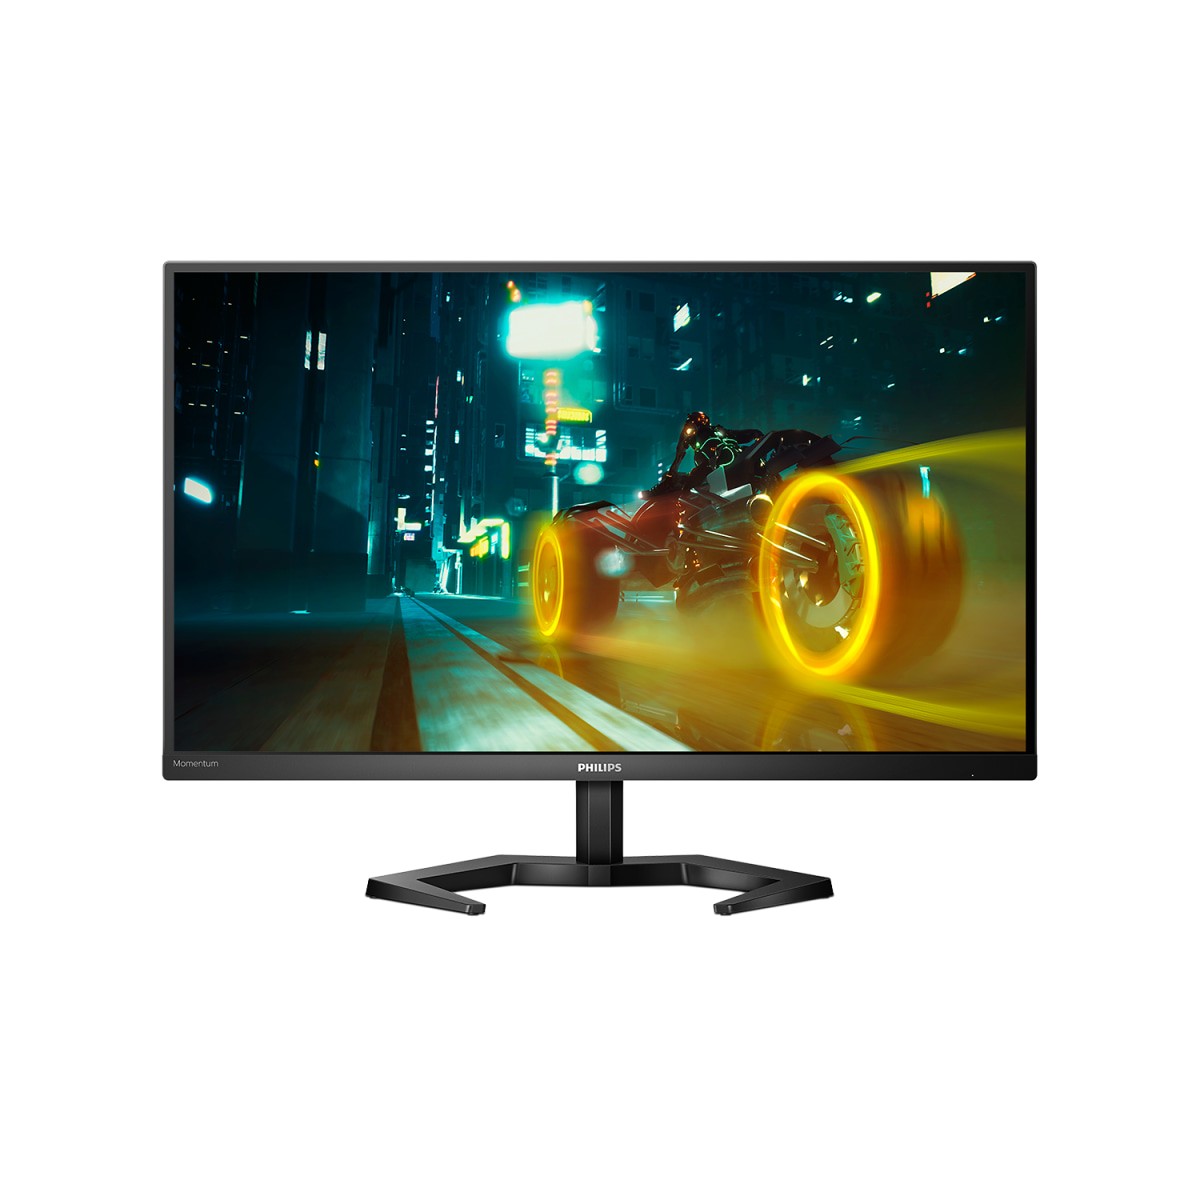 BenQ Zowie XL2566K 24.5(62.3 cm) LCD 1920 x 1080 Pixels TN 360Hz Gaming  Monitor, Motion Clarity with DyAc+TM, 1080P, XL Setting to ShareTM, Color  Modes, S Switch, Shield, Smaller Base